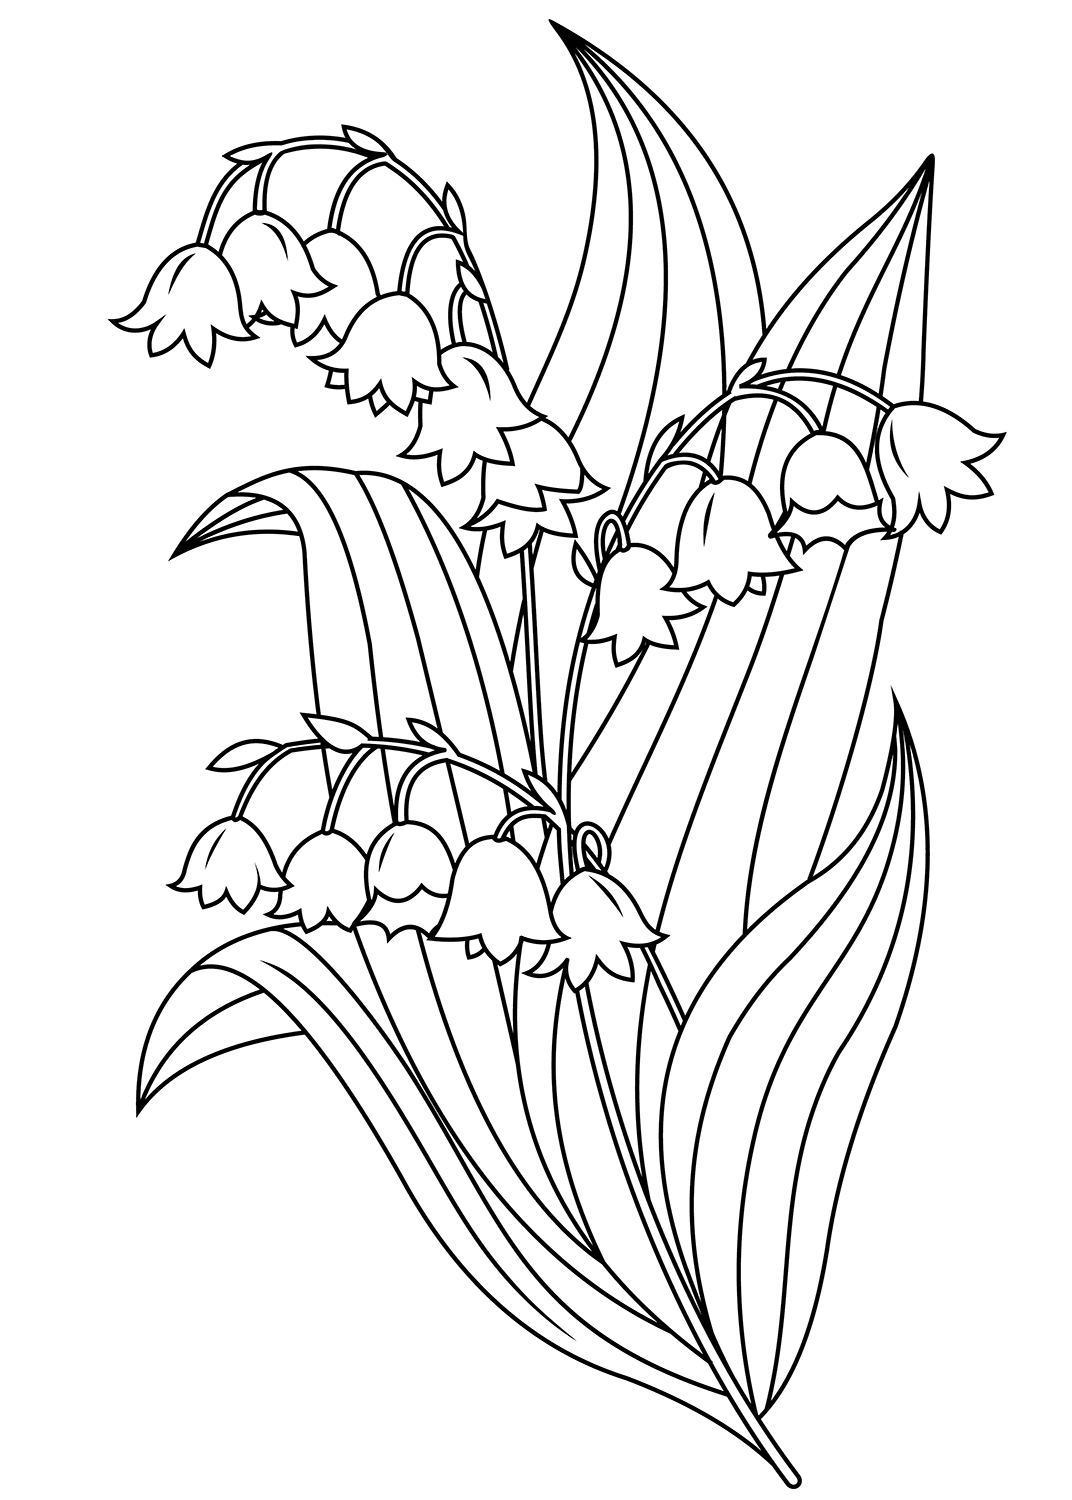 Lily of the Valley coloring page - ColouringPages